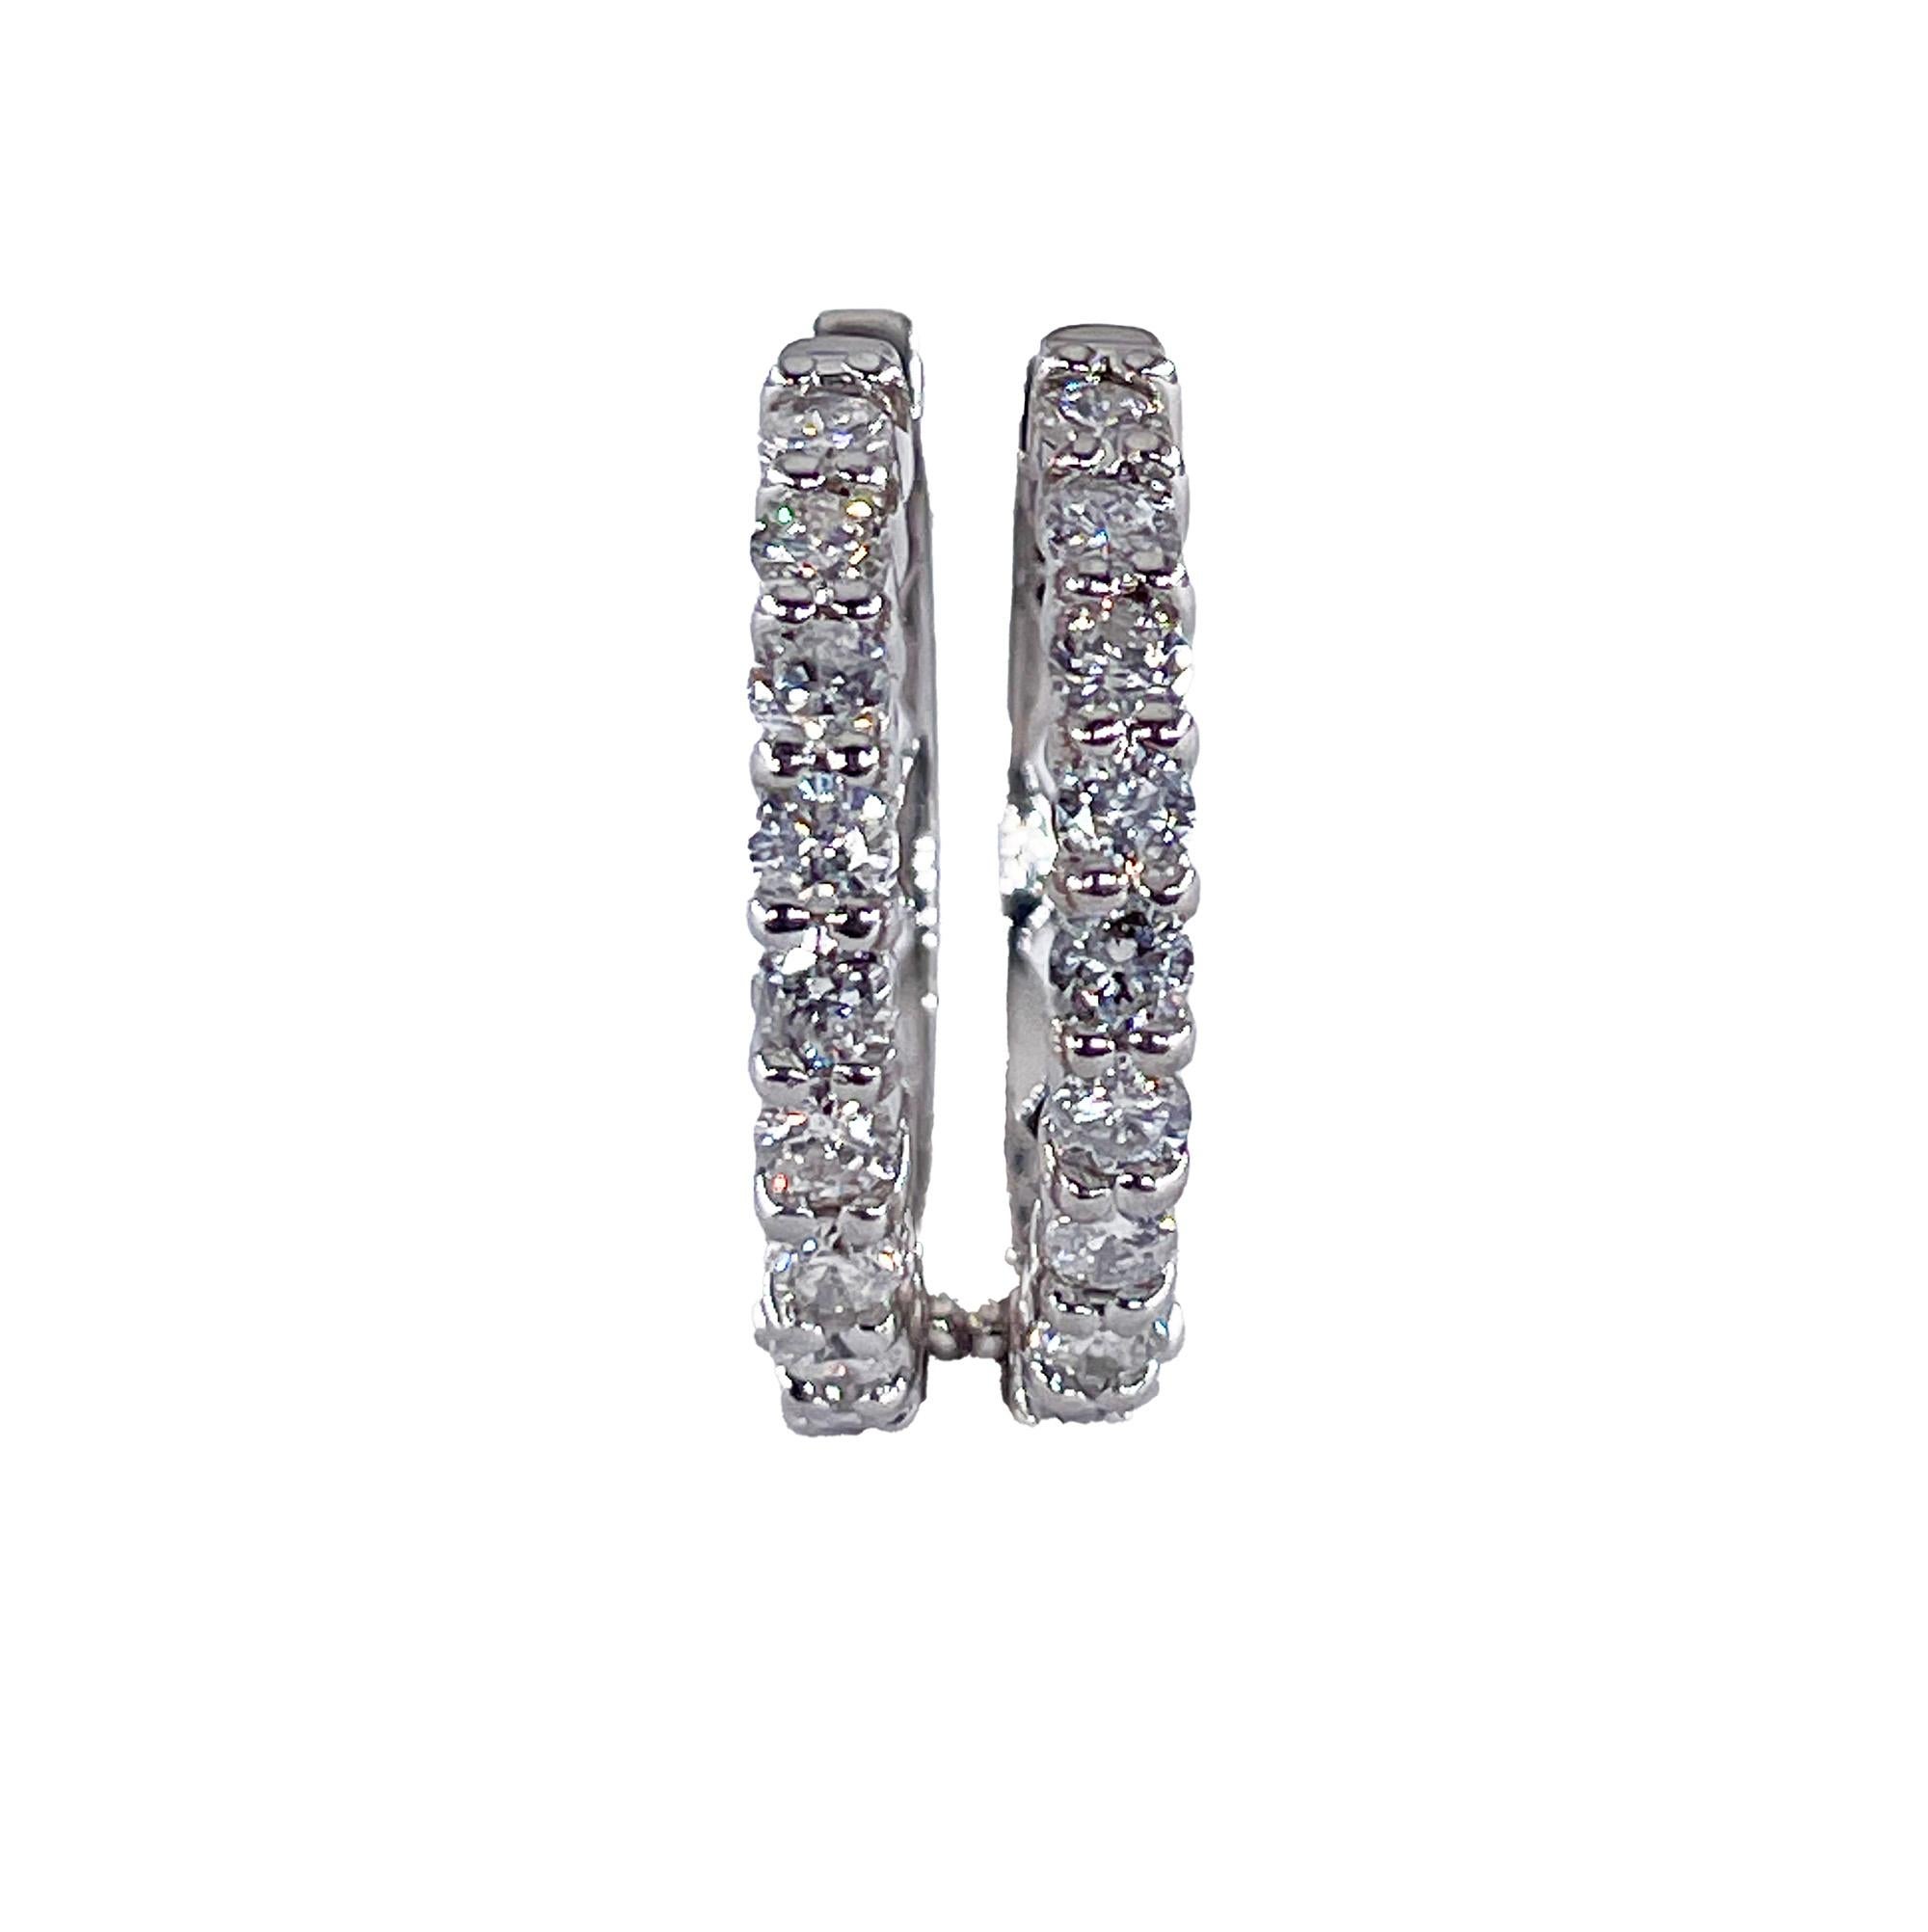 22mm Estate Round 1.10ctw Diamond Prongs 14k White Gold Hoop Earrings
Regardless of how big or small, diamond hoop earrings are an on-trend alternative to the more conservative diamond stud earrings. While hoops offer a bit of boldness, the diamonds